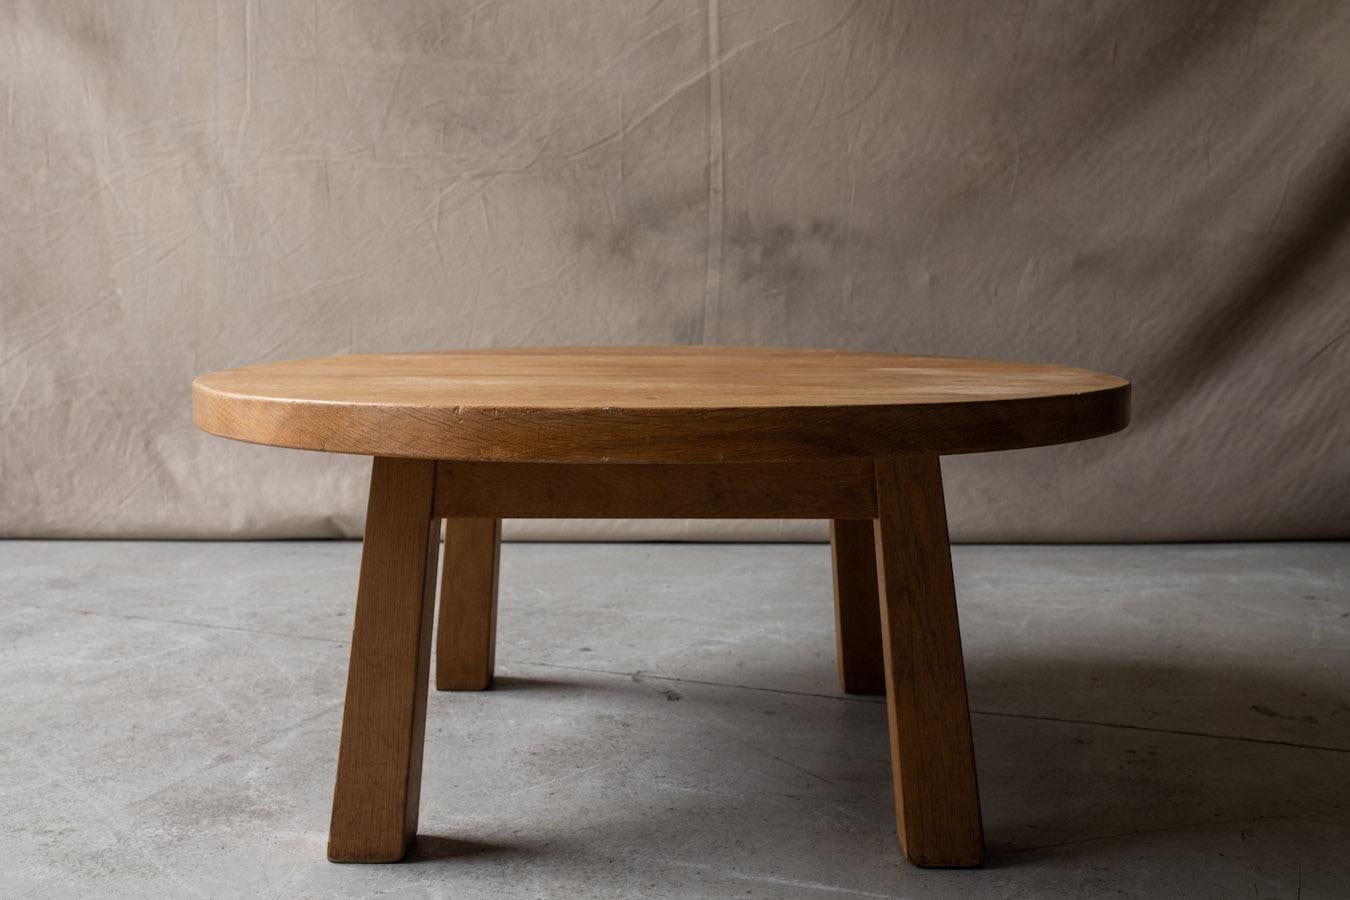 Vintage circular oak coffee table from France, circa 1960. Solid light oak construction with four squared legs. Light wear and use.